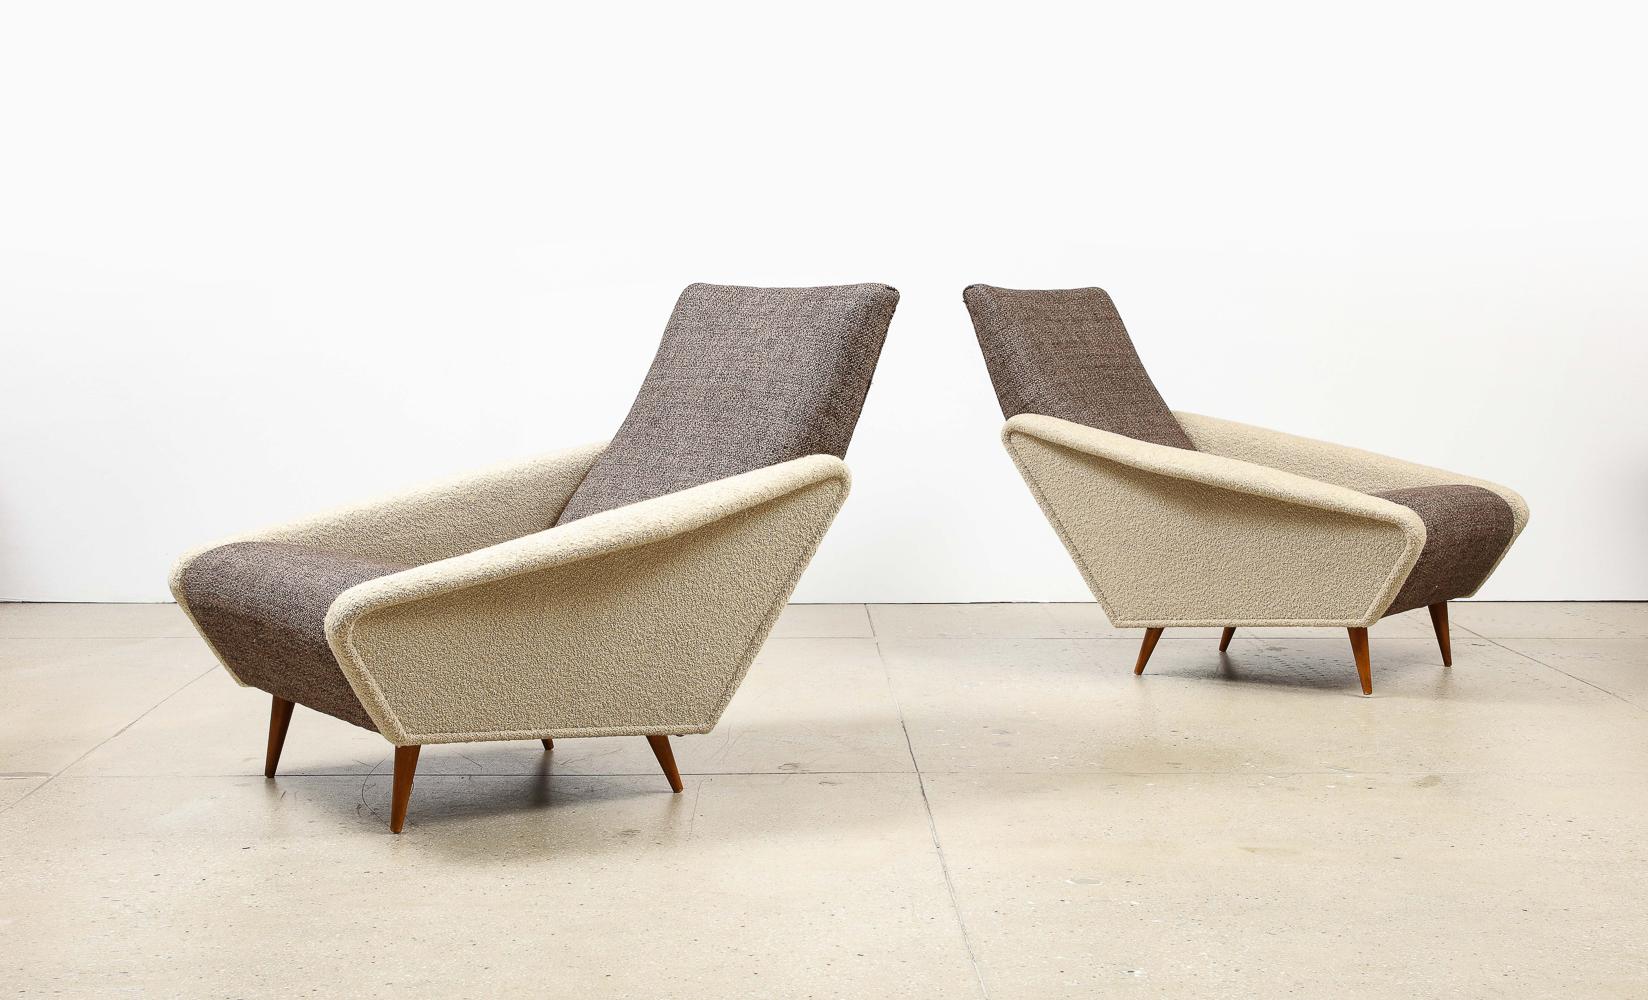 Model No. 807A Distex Lounge Chairs by Gio Ponti for Cassina.  Walnut, fabric. A rare & iconic model.  The Distex chair was first presented at the X Triennale in Milan in 1954.